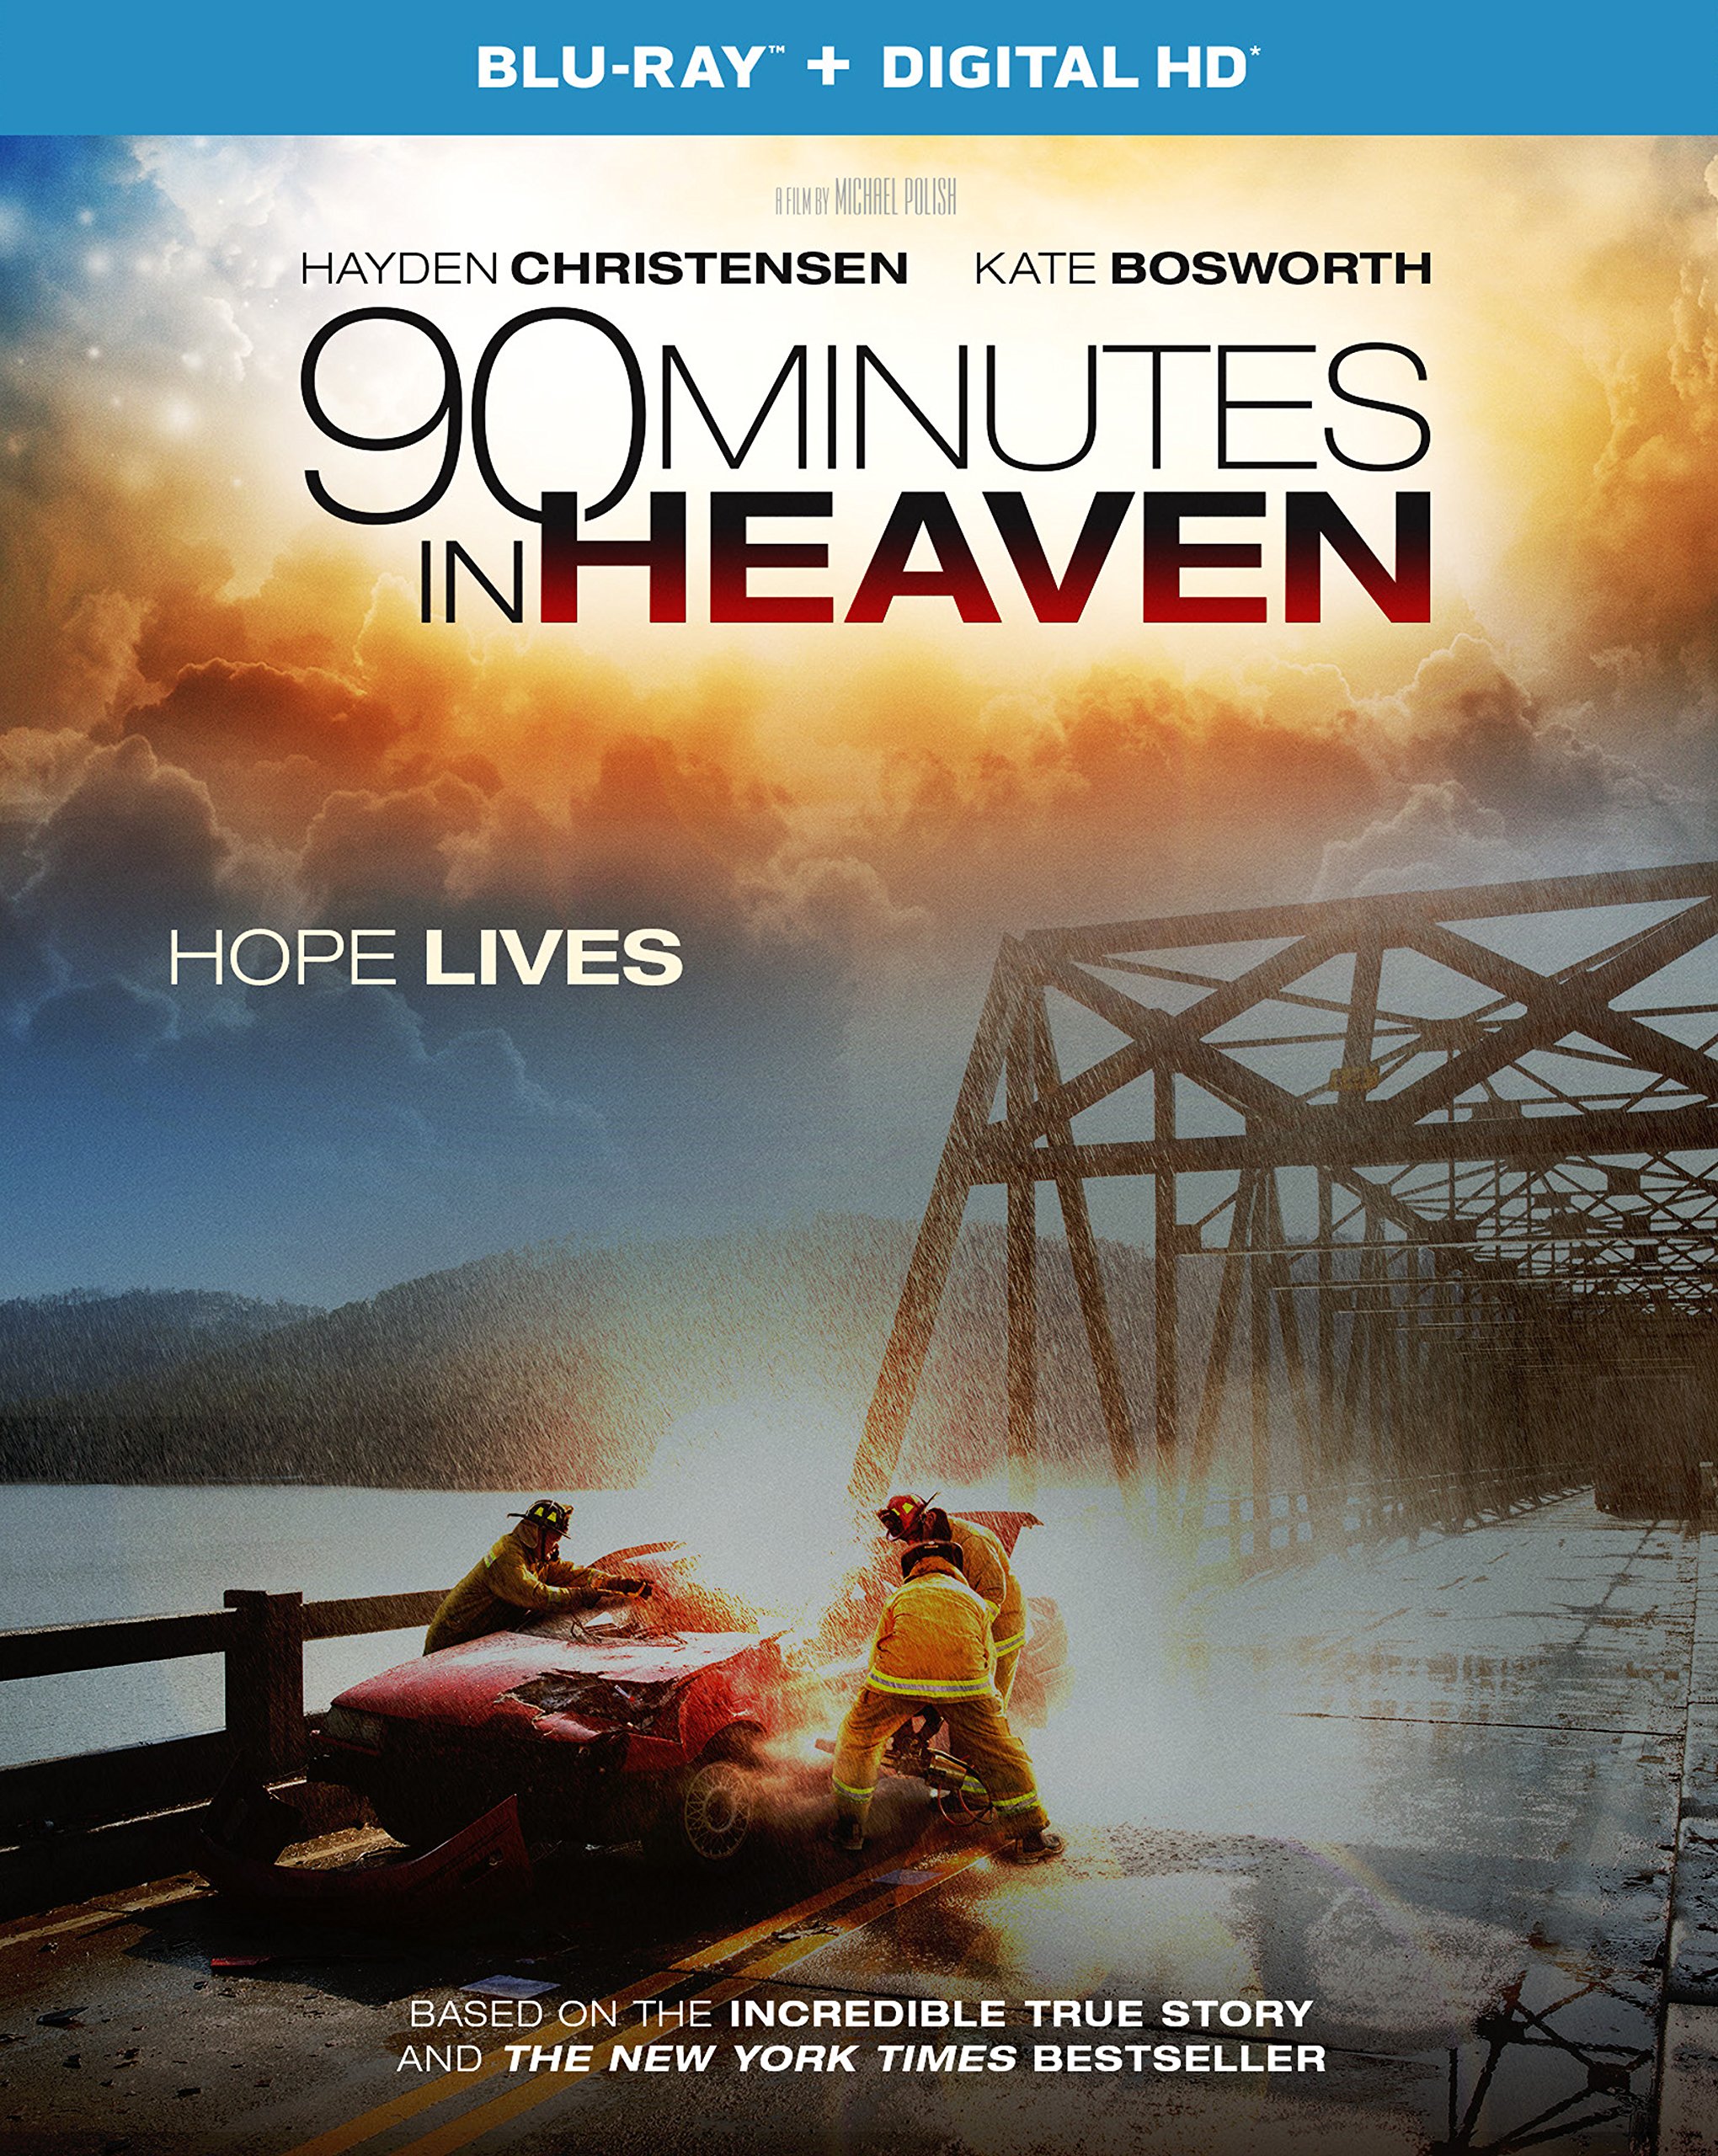 HQ 90 Minutes In Heaven Wallpapers | File 1035.91Kb